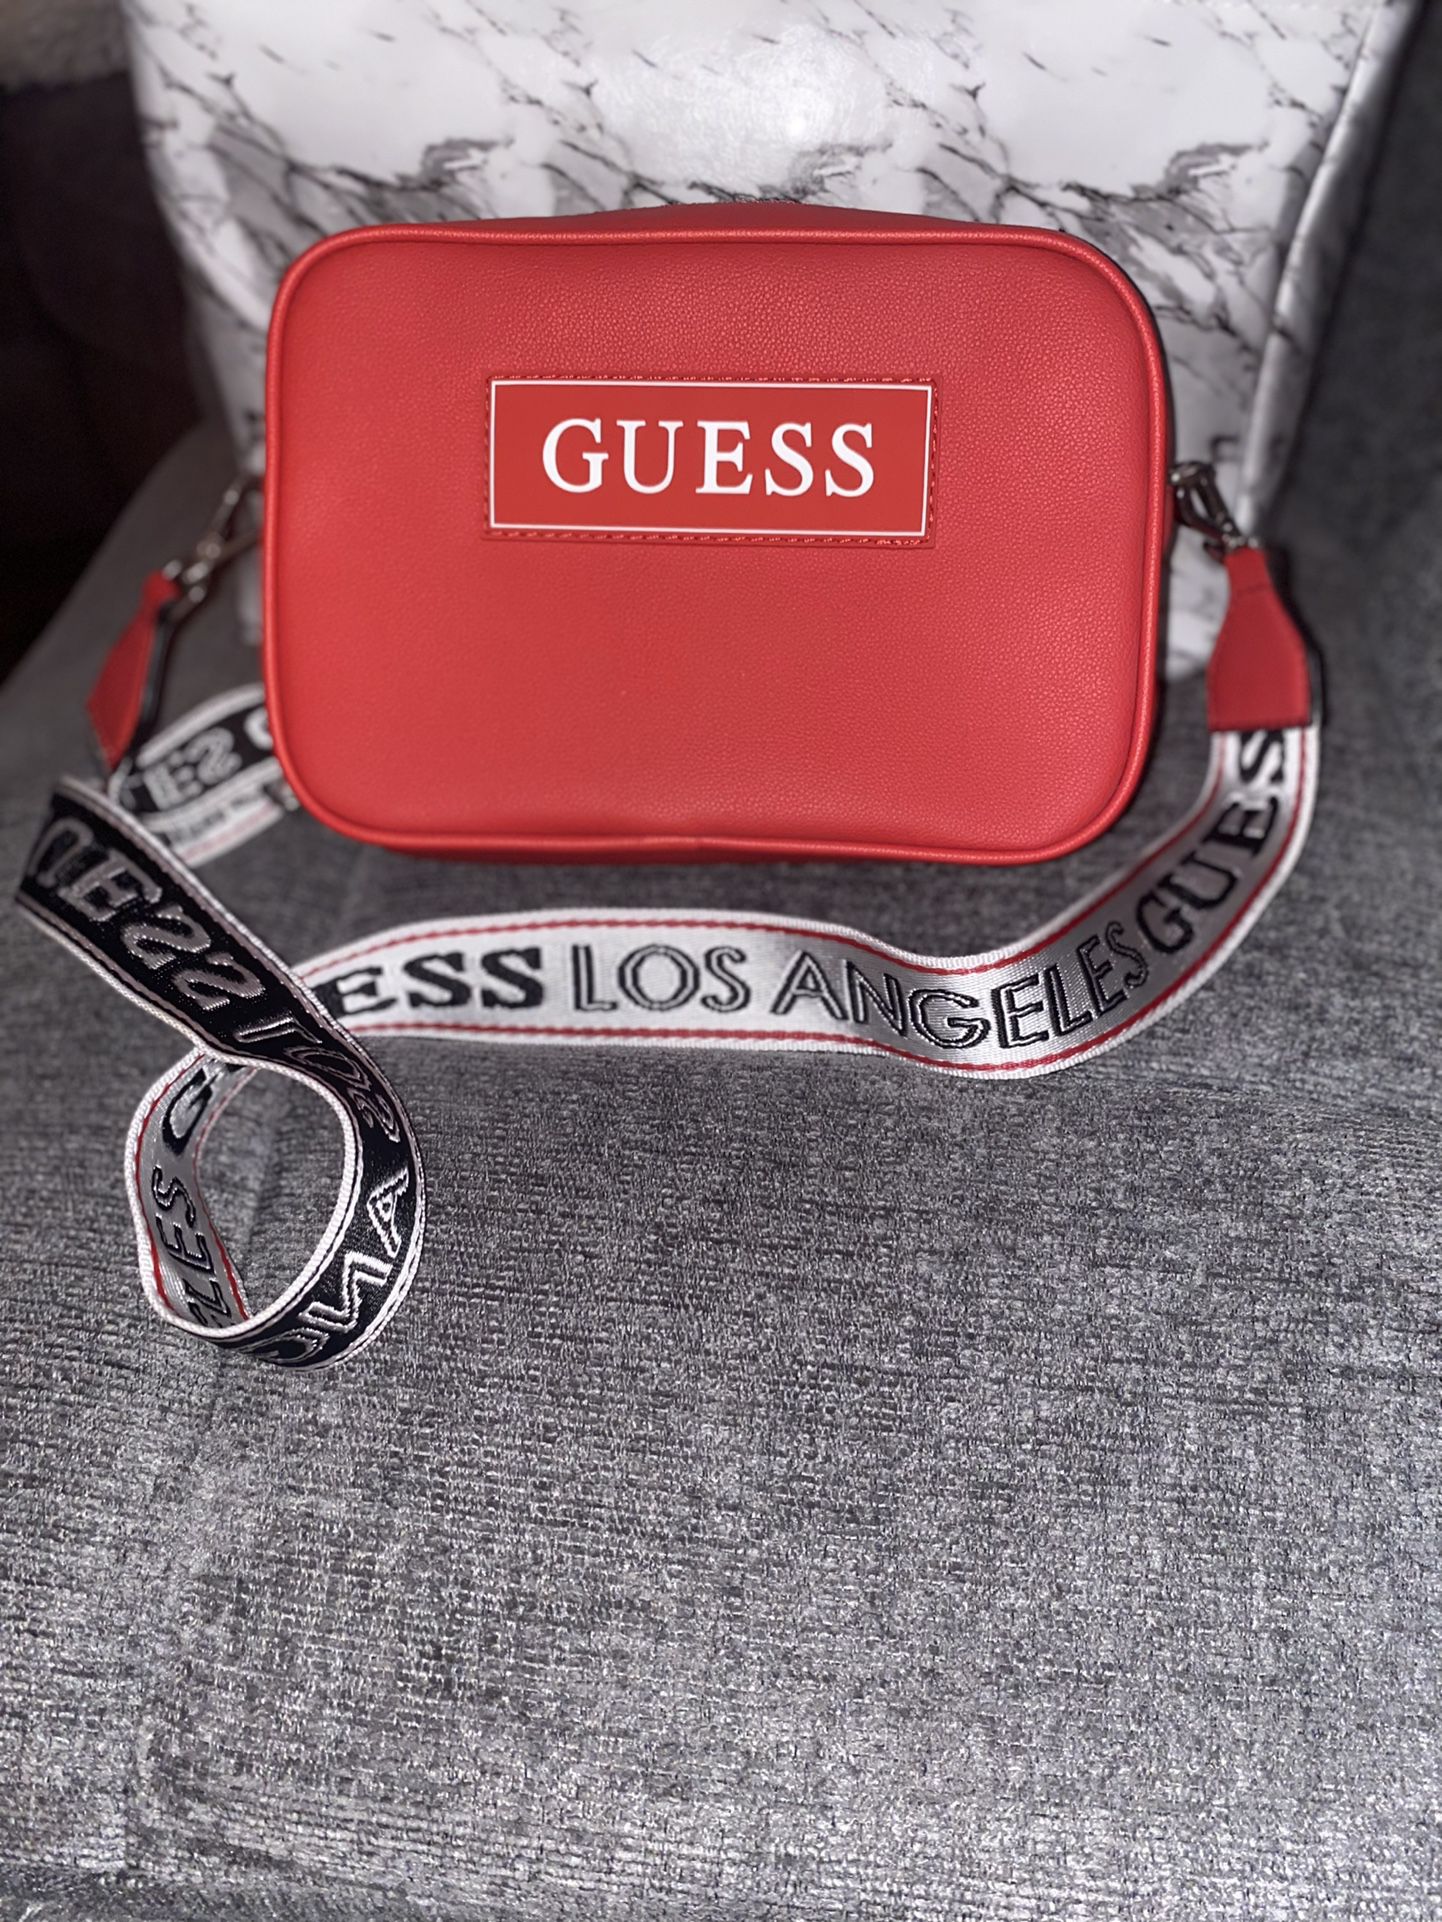 Guess Red Crossbody